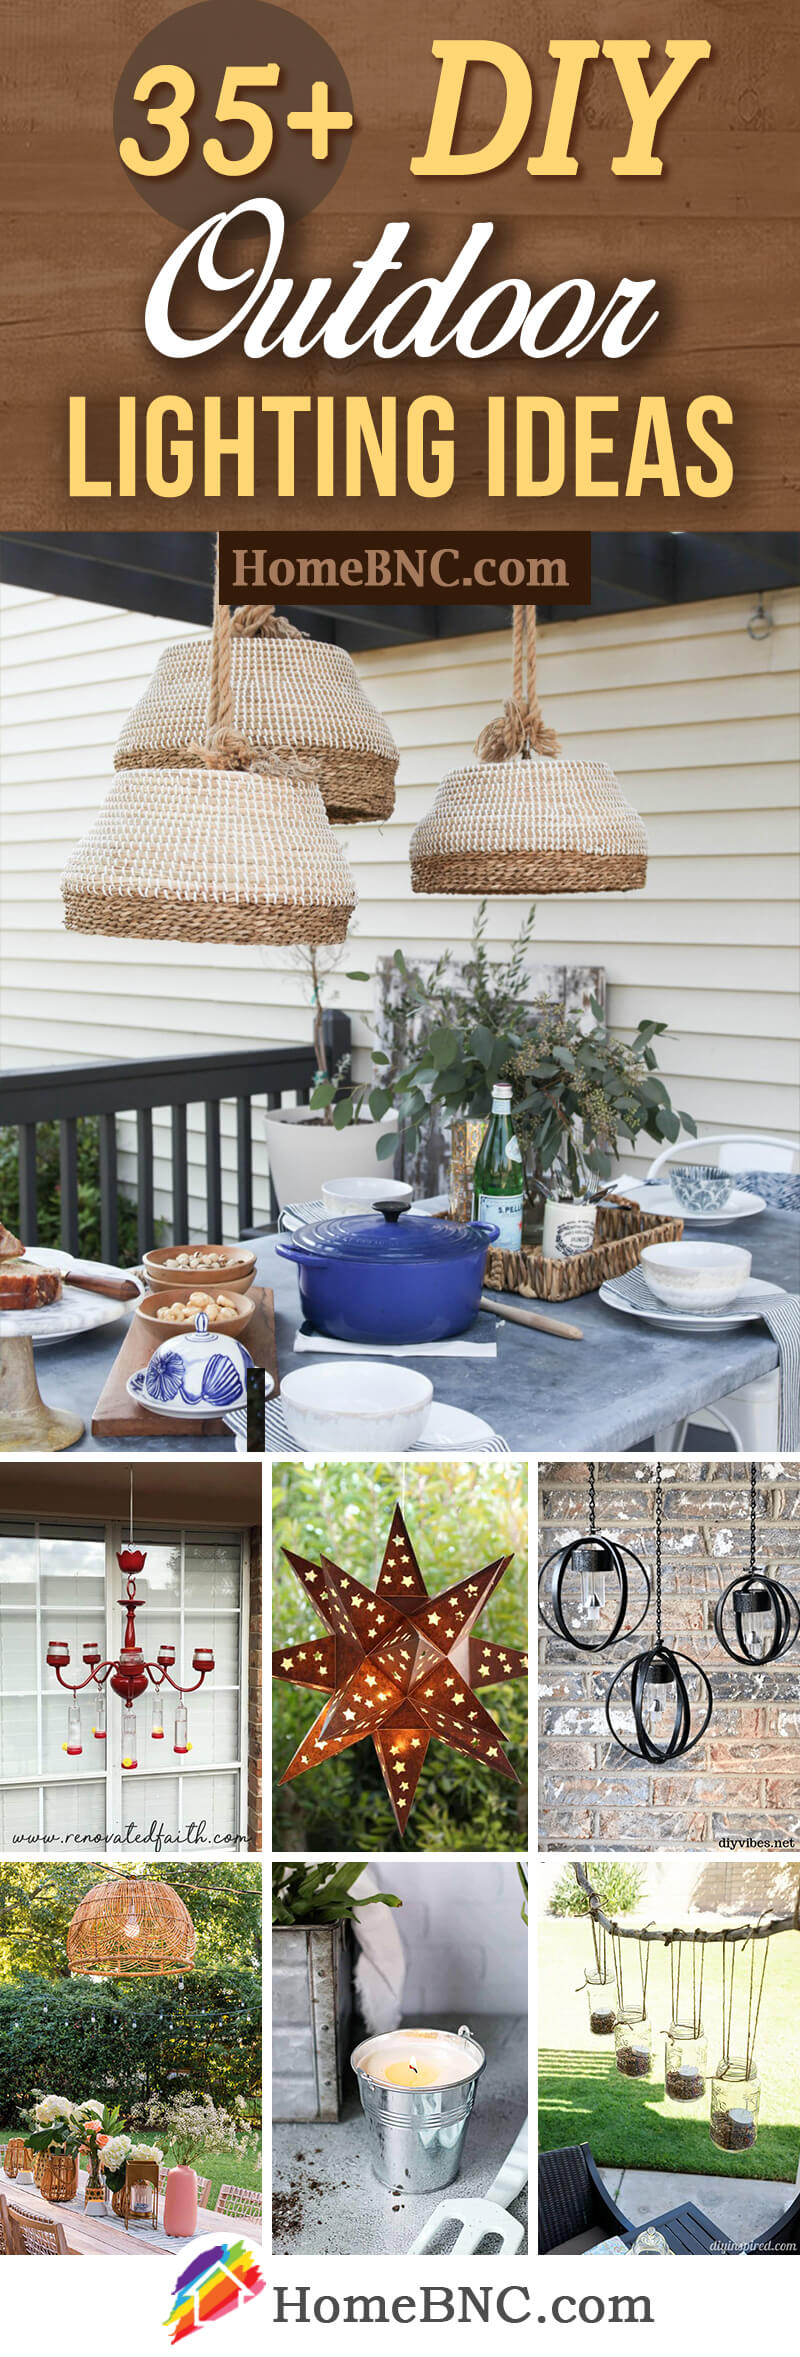 35 Best Diy Outdoor Lighting Ideas And, Lighted Yard Decorations For Summer House